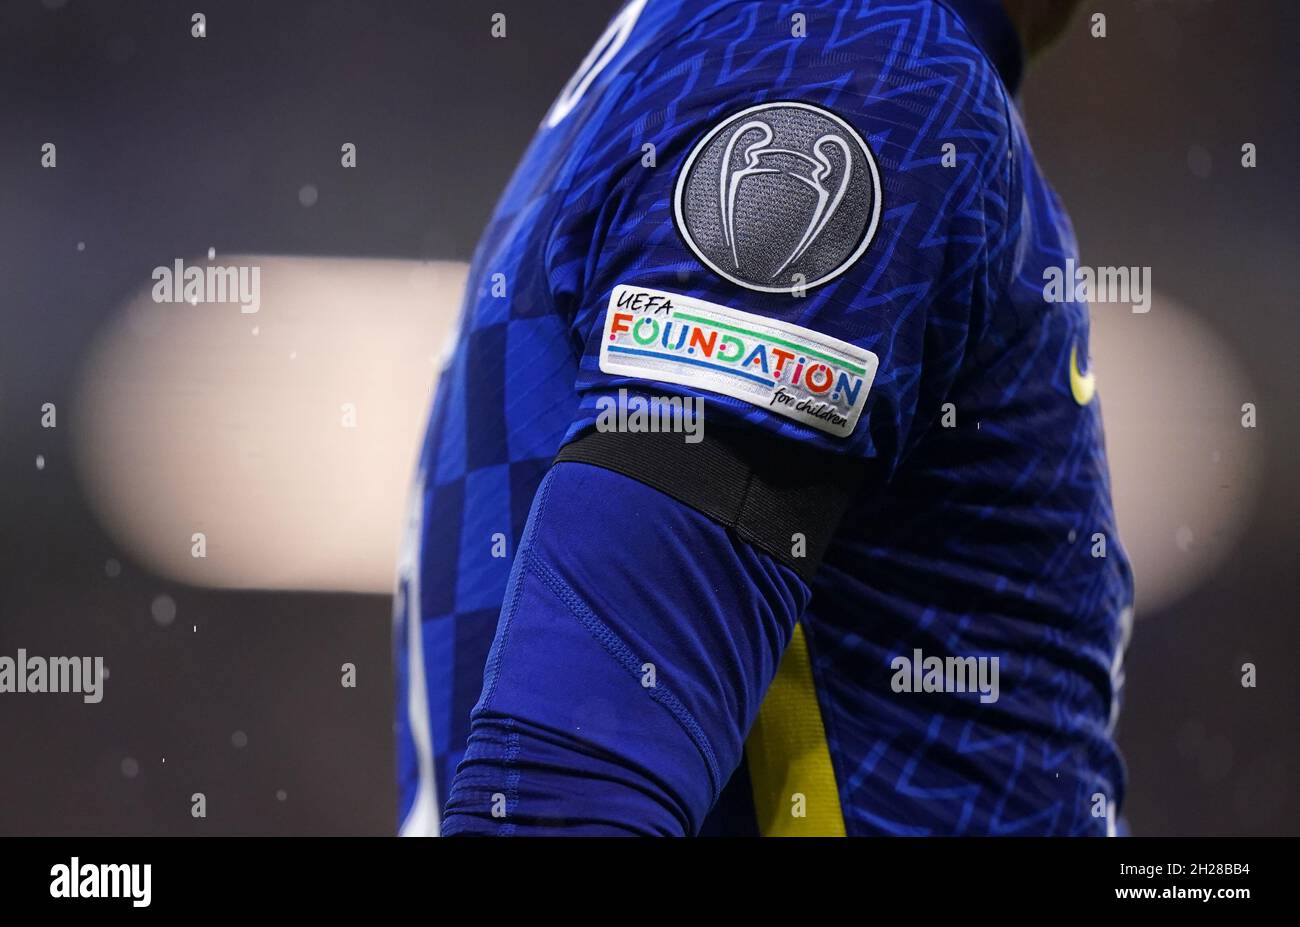 Detail of the UEFA Foundation badge on the shirt of a Chelsea player during  the UEFA Champions League, Group H match at Stamford Bridge, London.  Picture date: Wednesday October 20, 2021 Stock